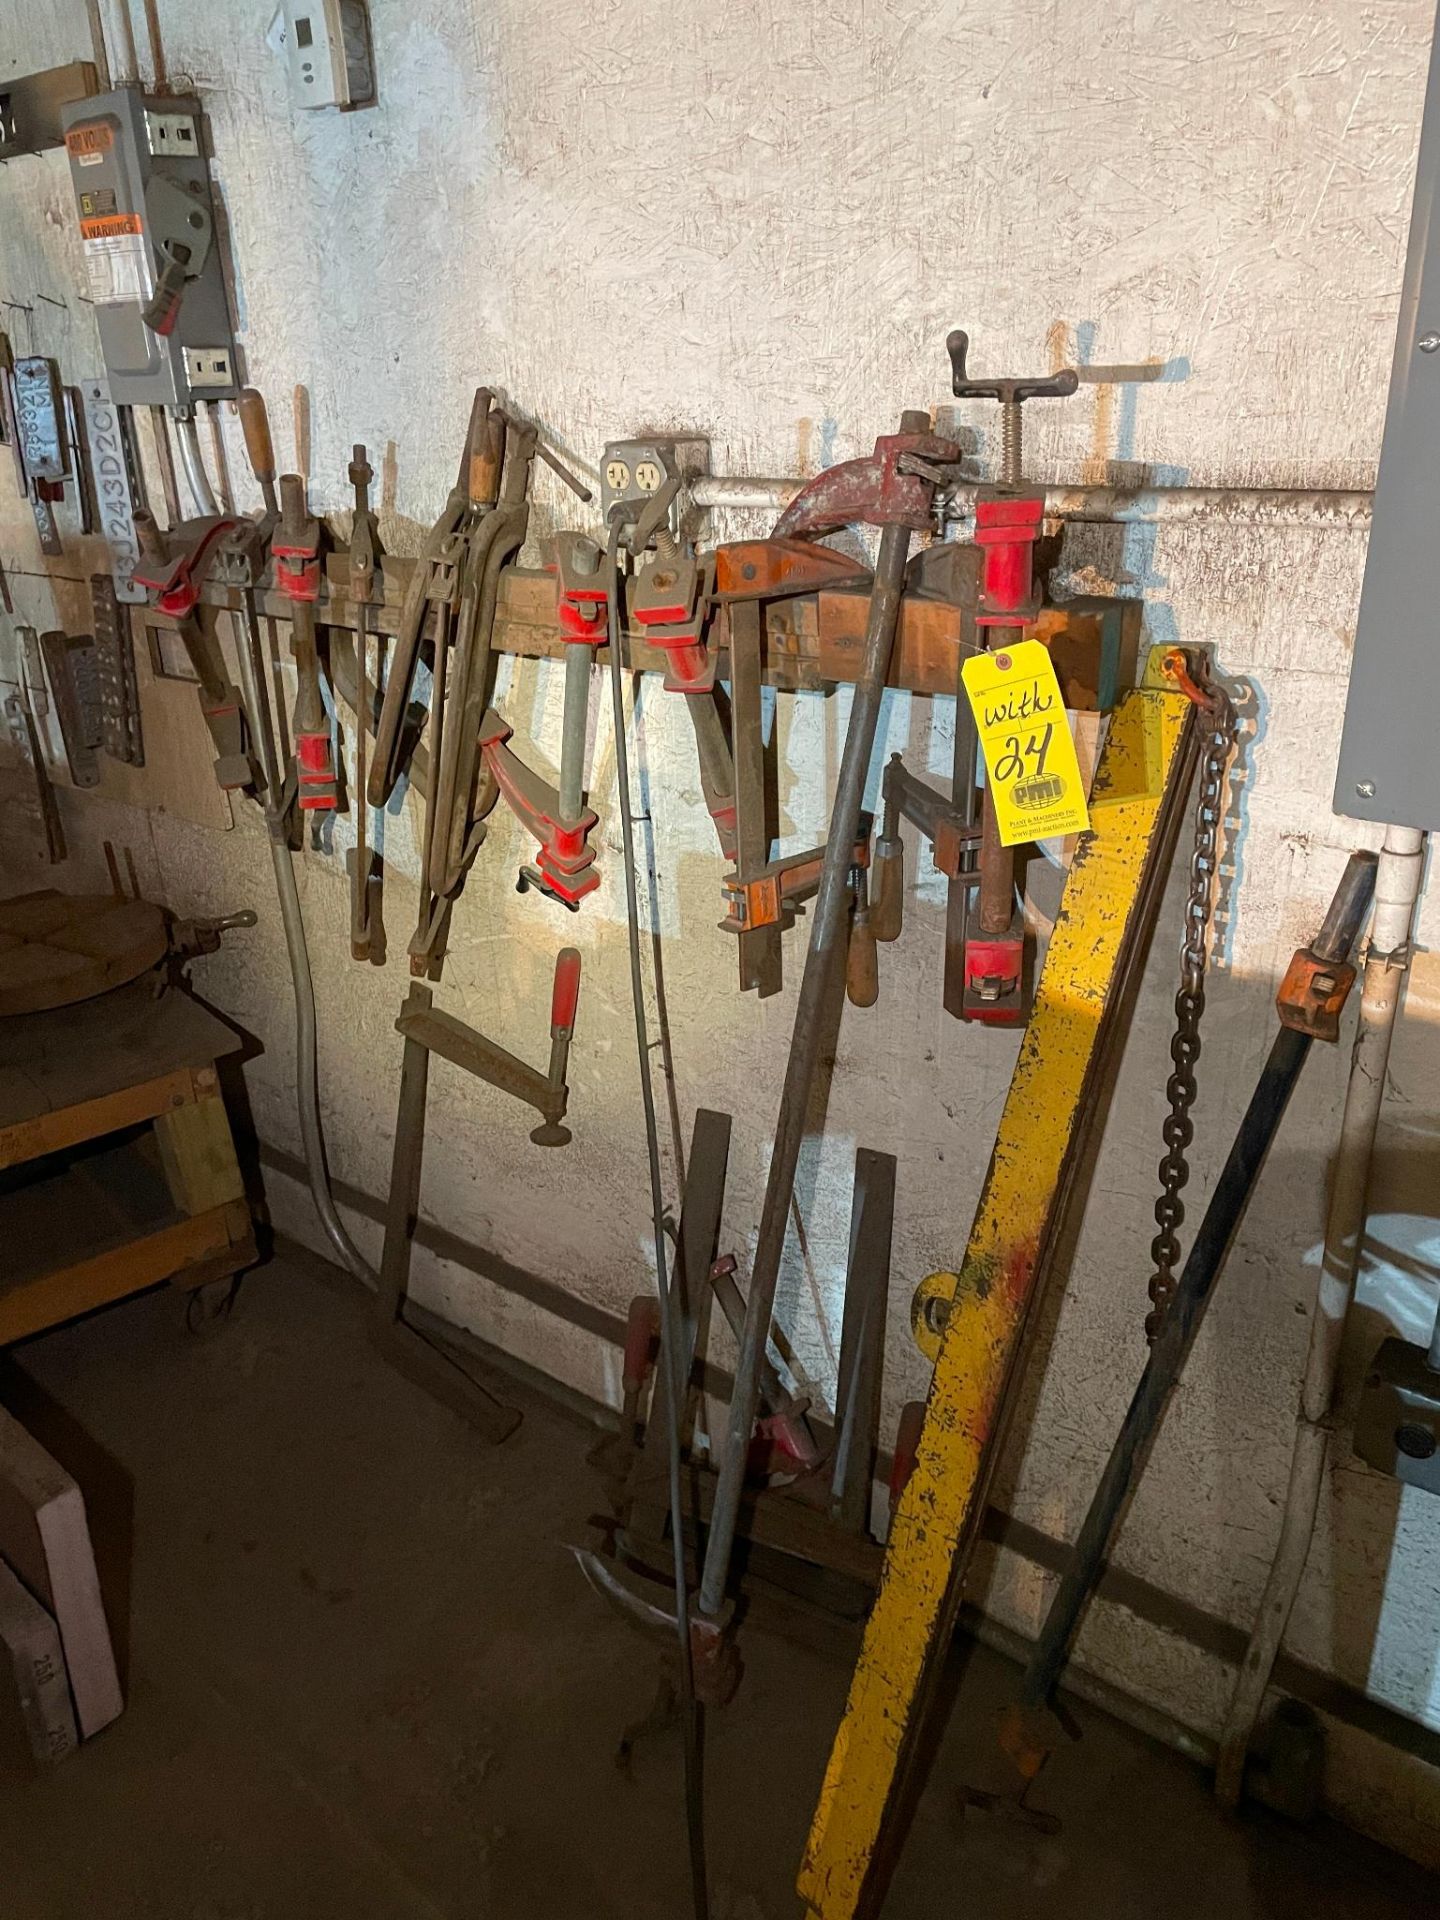 LOT OF WORK BENCHES & CABINETS, w/ contents: bar clamps, eye bolts, wood screws, lag screws, - Image 6 of 11